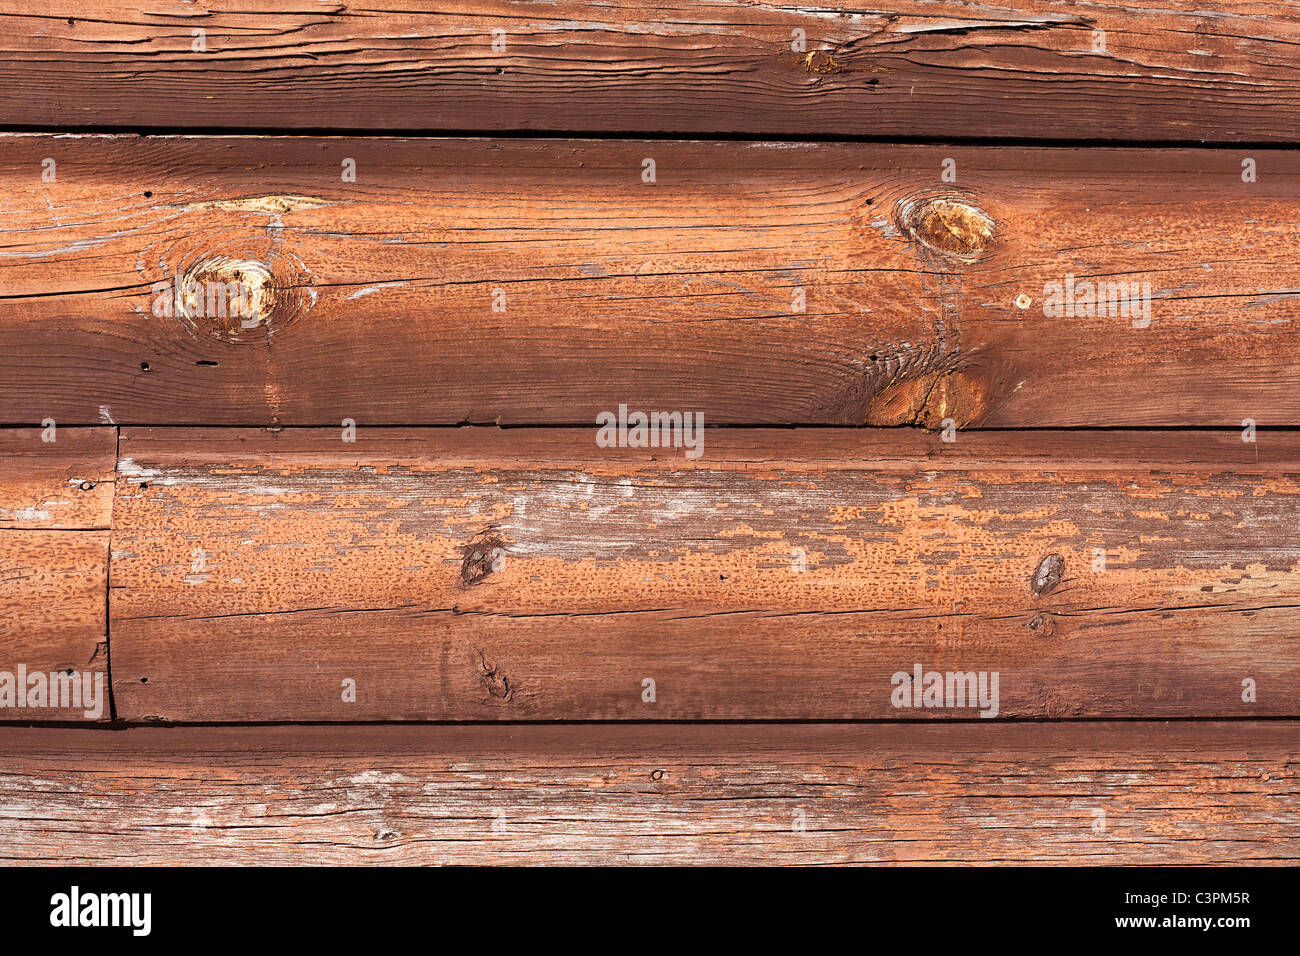 Some old and weathered wooden siding. Stock Photo